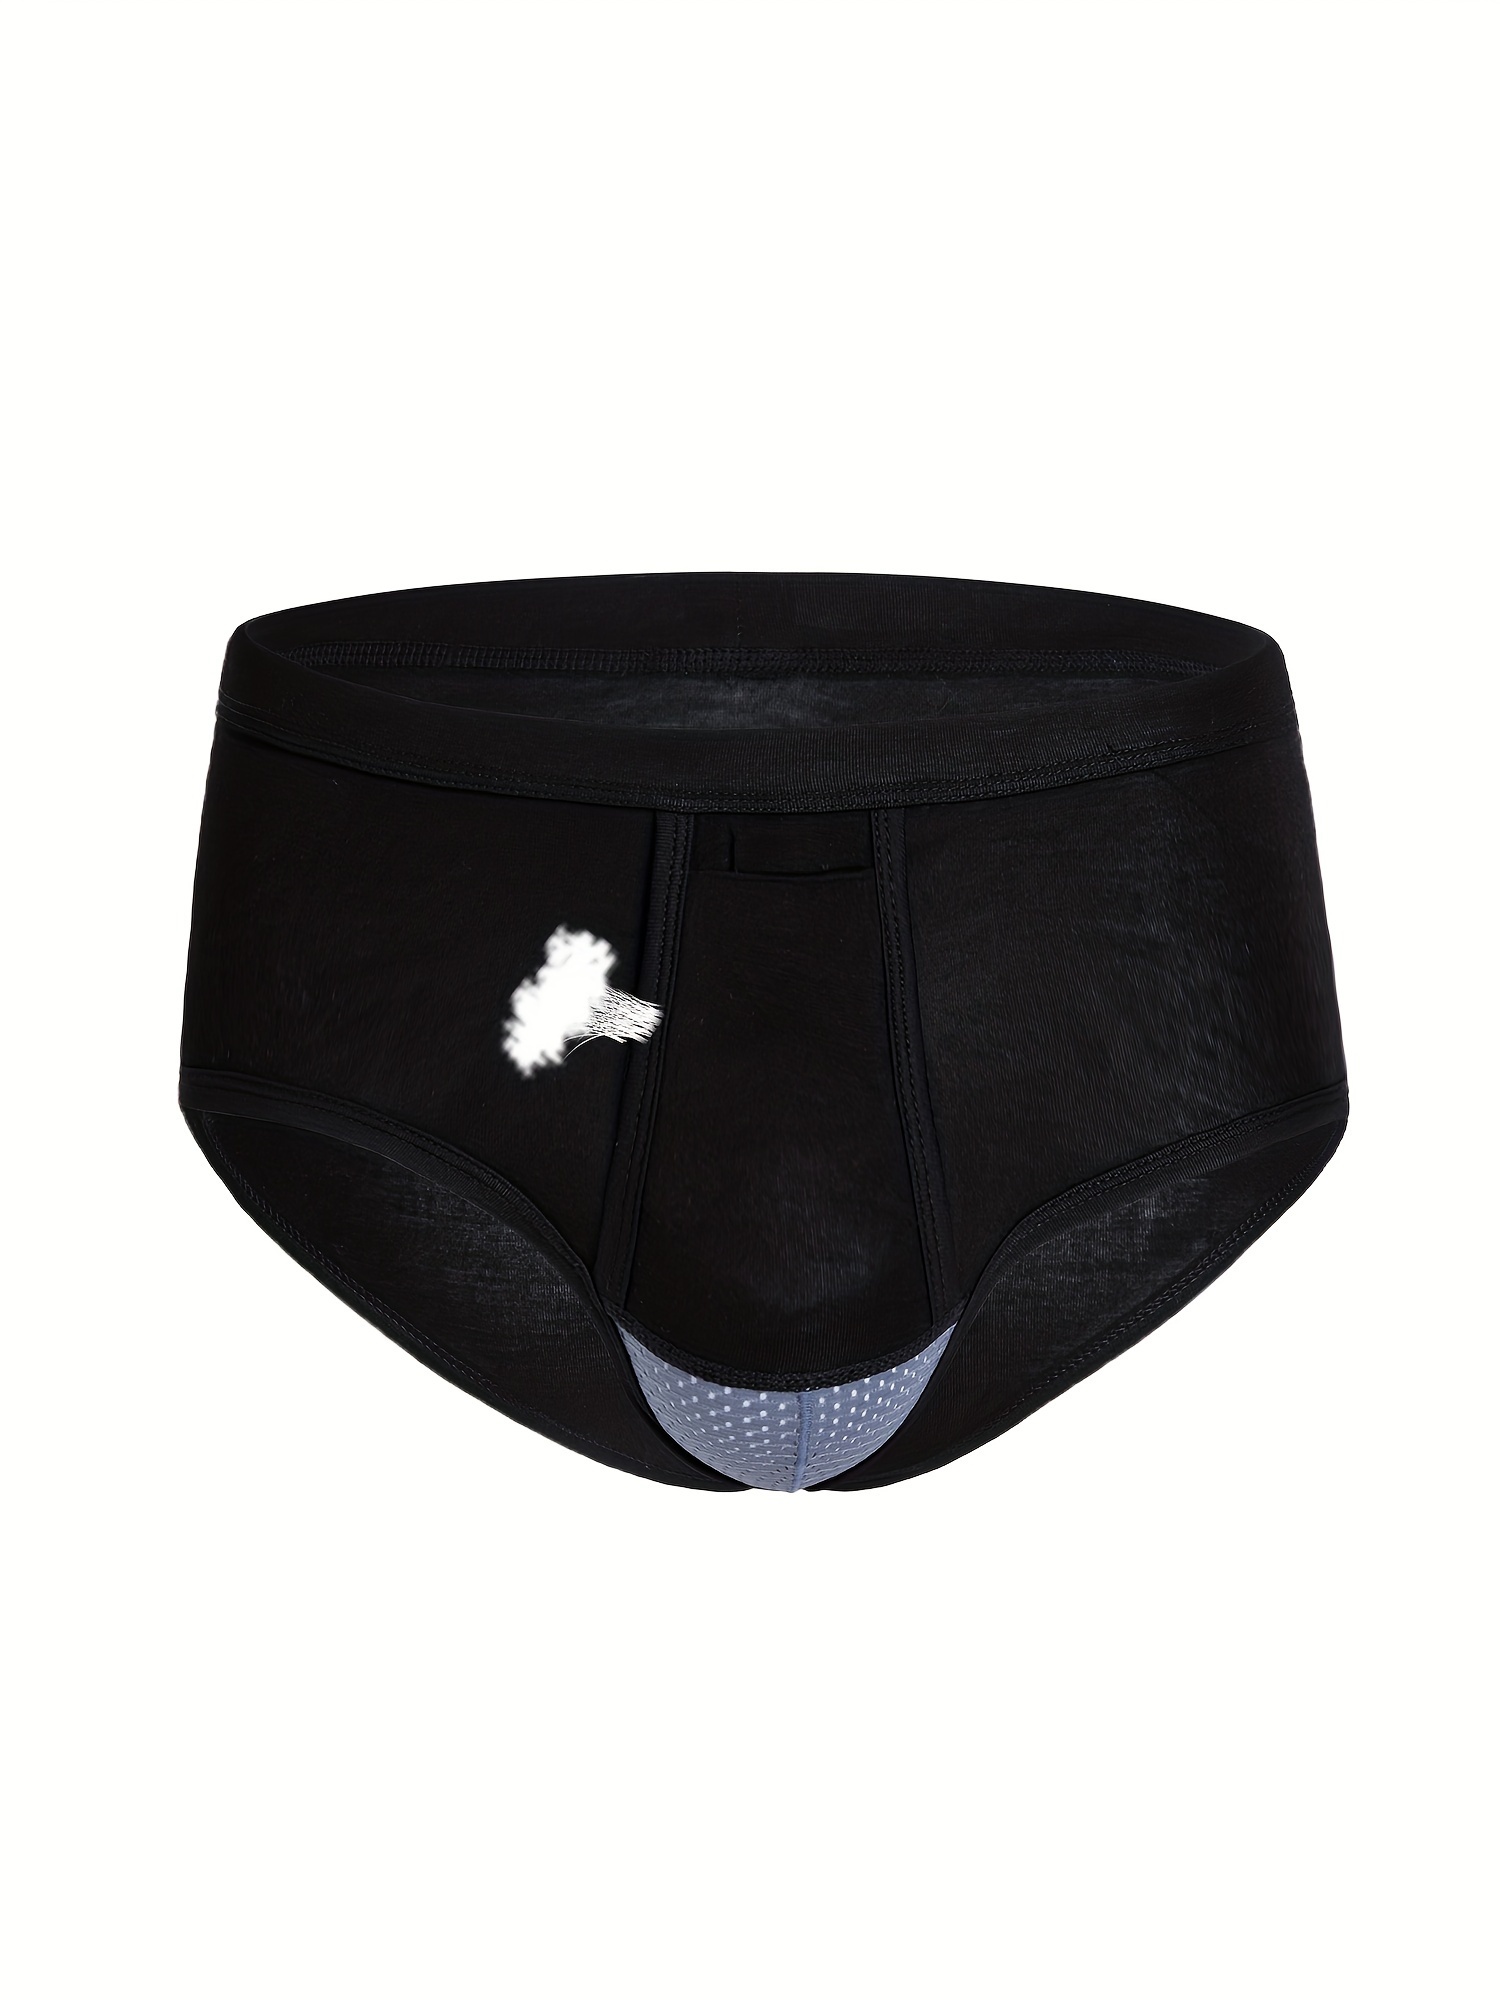 Mens Ball Pouch Underwear Briefs Classic Jockstrap Pouch Male Bikini  Athletic Supporters Comfort Sexy Black at  Men's Clothing store